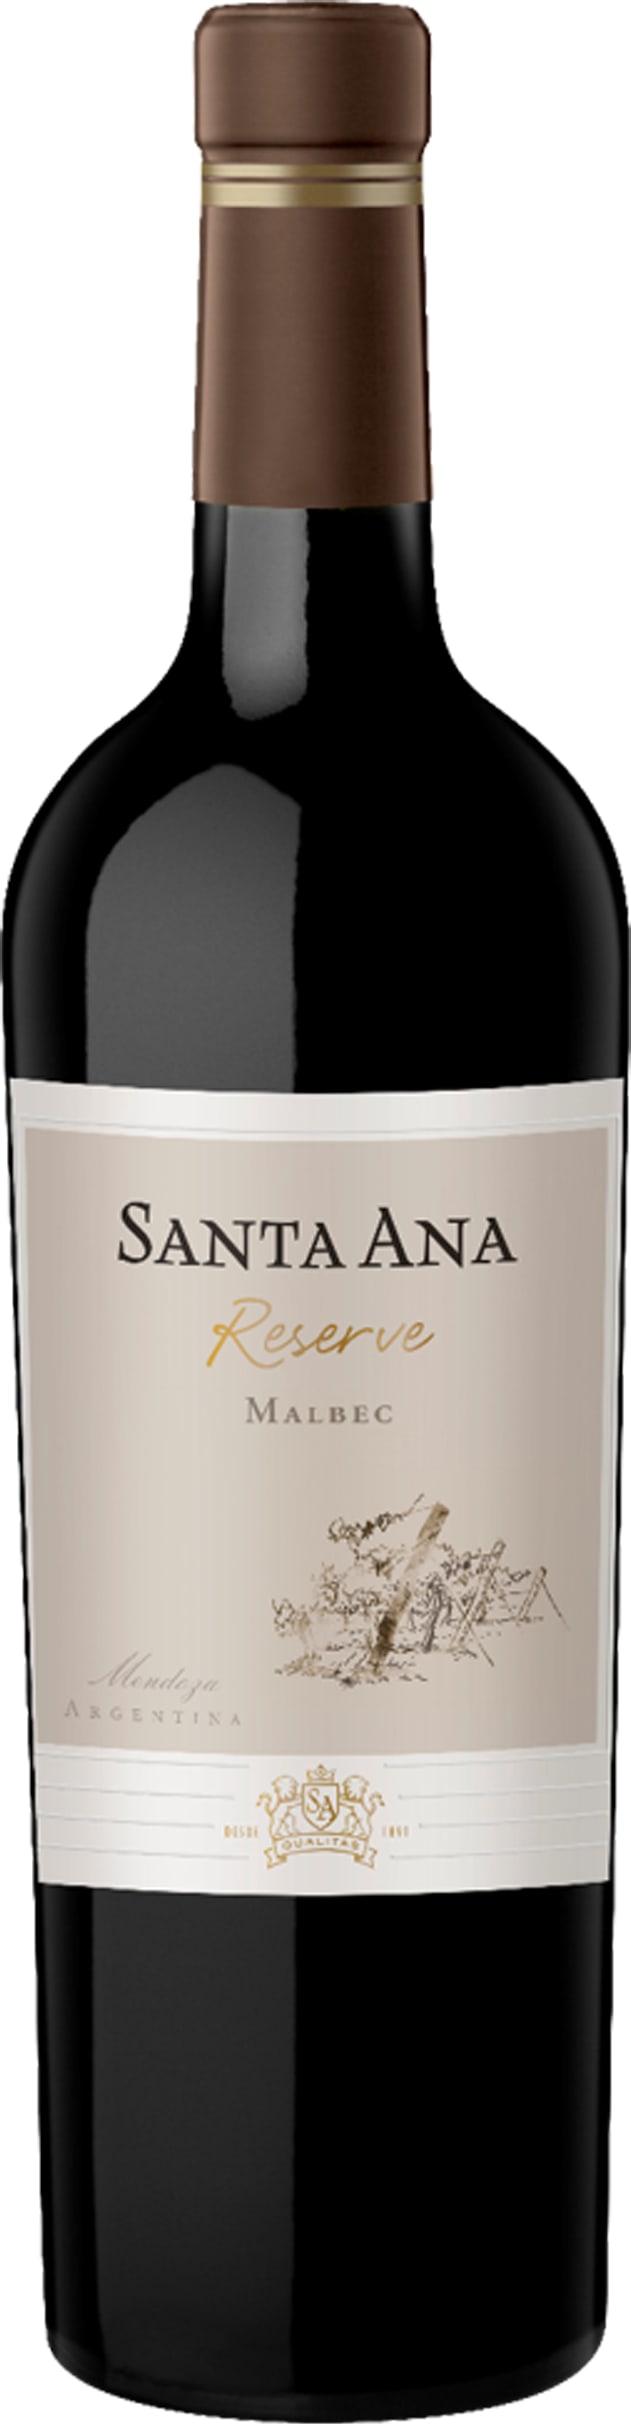 Santa Ana Reserve Malbec 2022 75cl - Buy Santa Ana Wines from GREAT WINES DIRECT wine shop